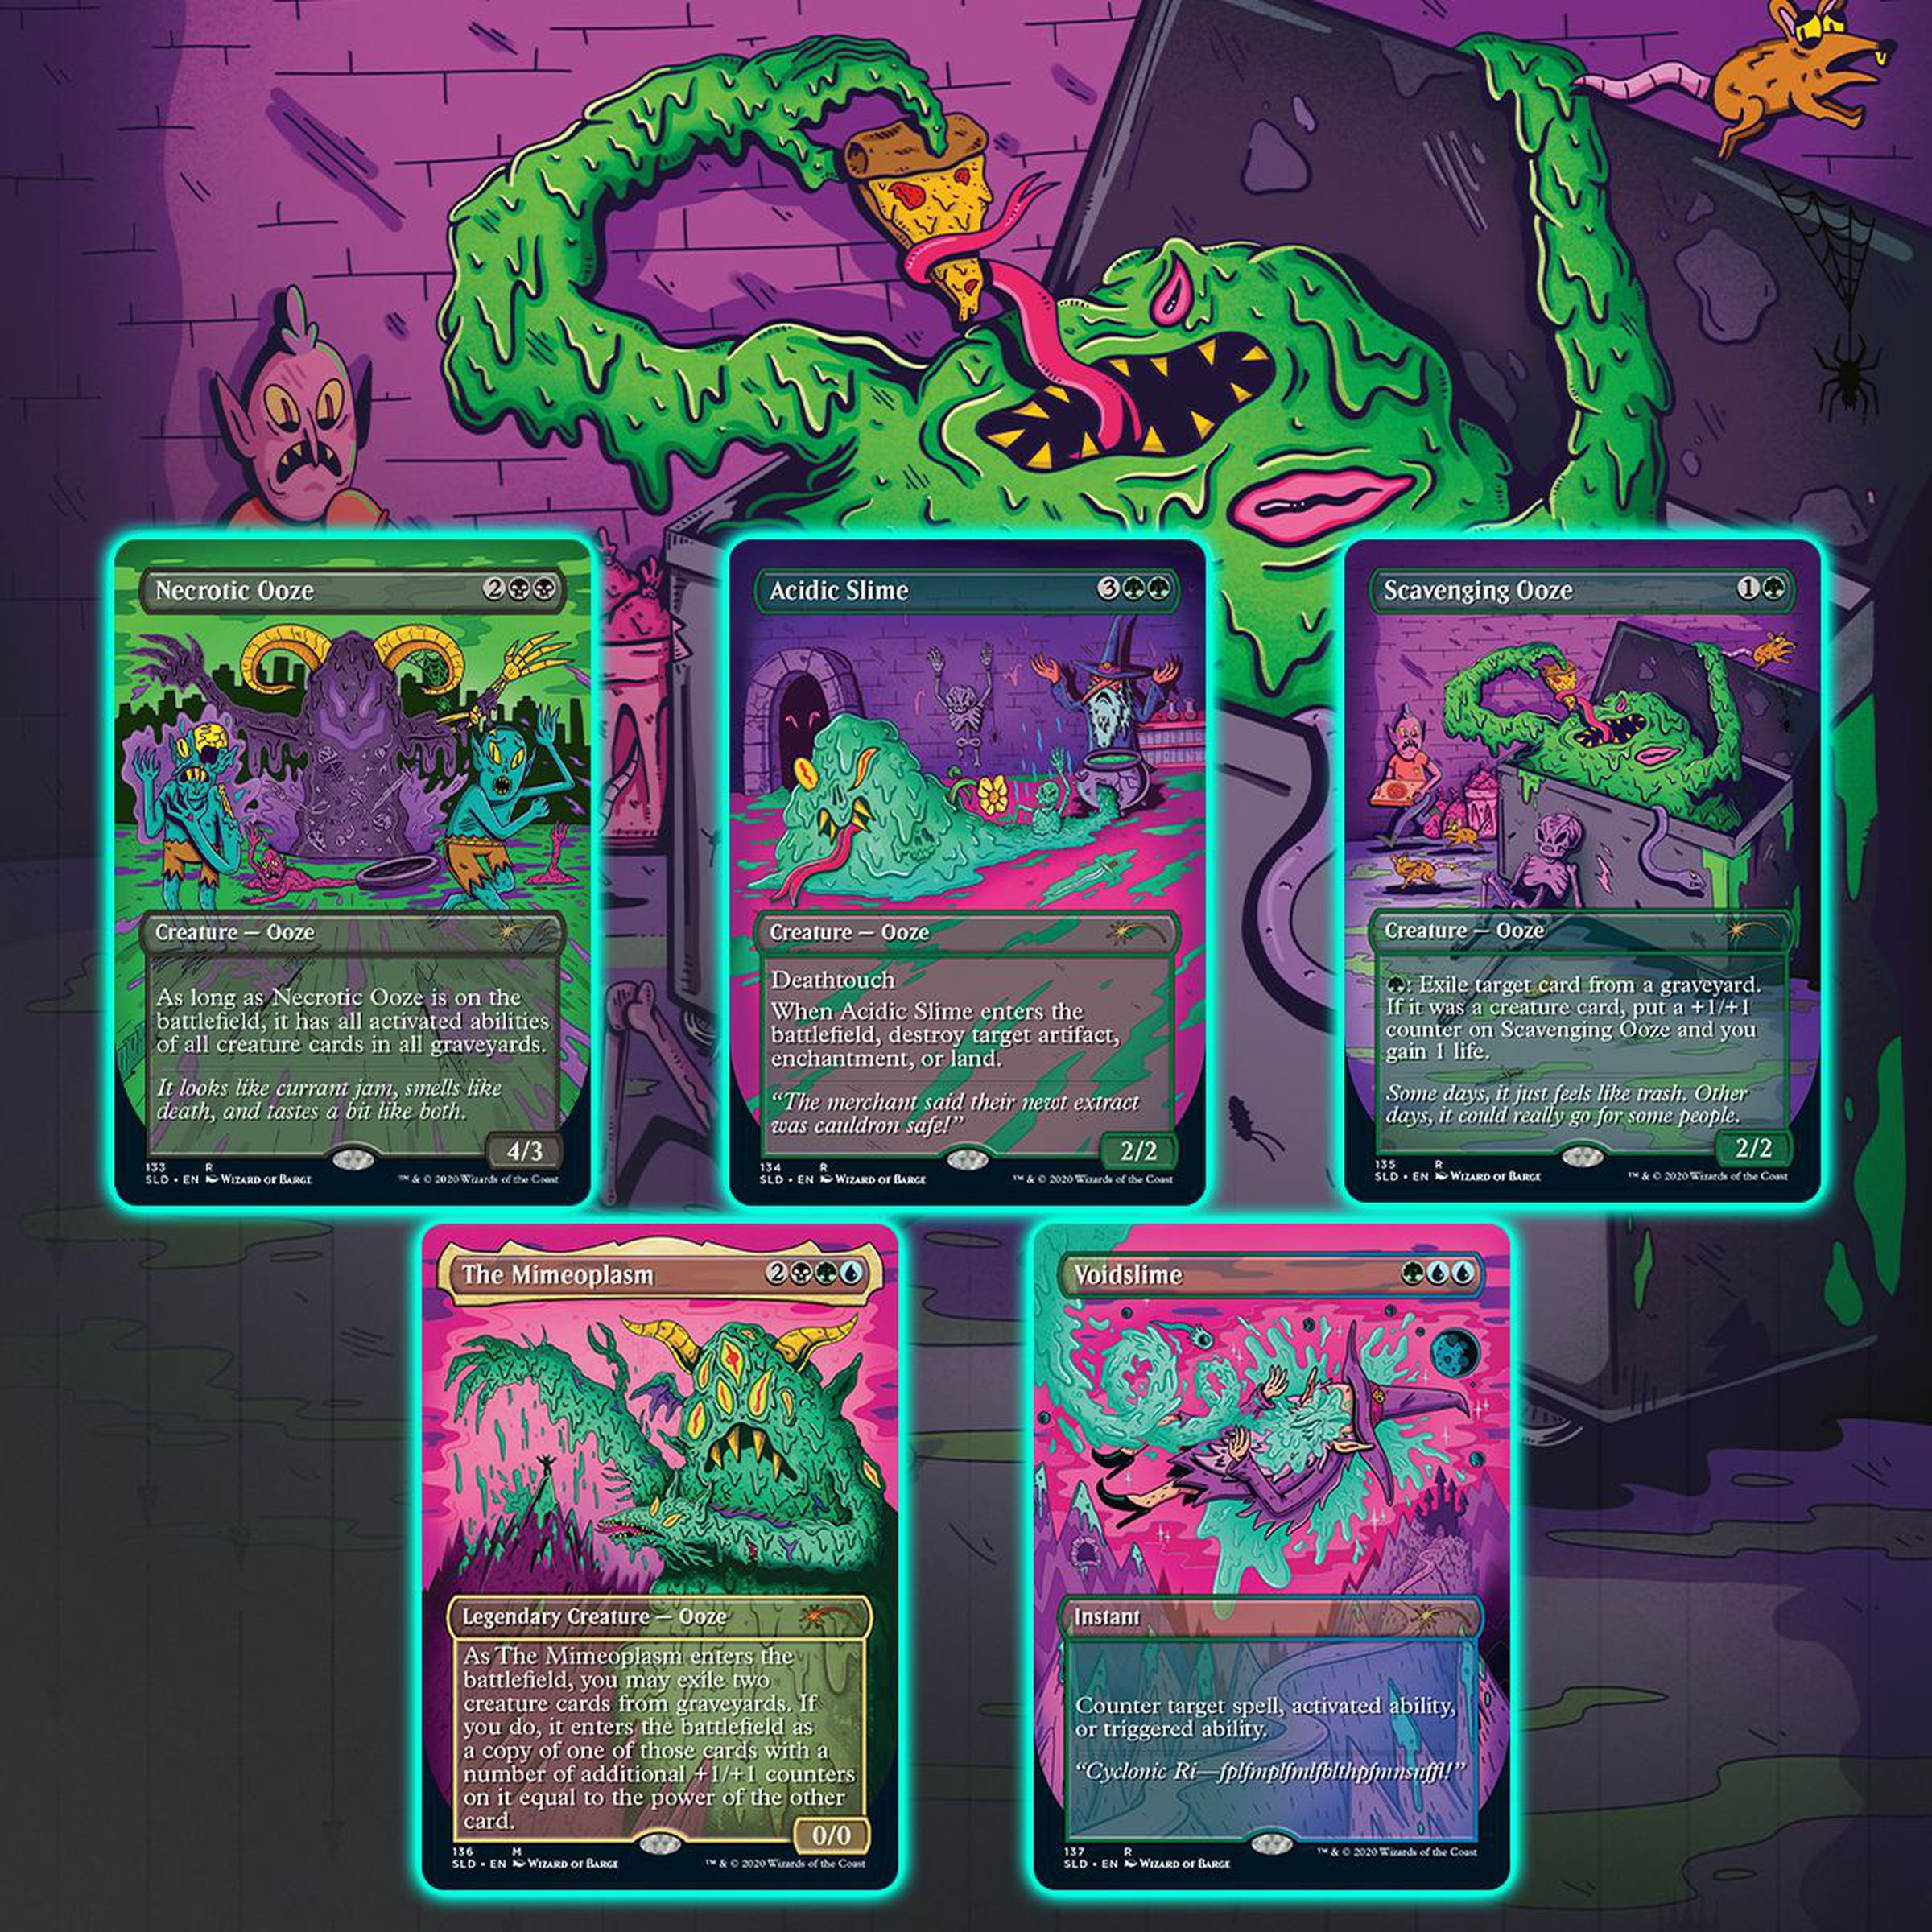 Prime Slime includes five cards from Magic’s History: Acidic Slime, The Mimeoplasm, Necrotic Ooze, Scavenging Ooze, and Voidslime.